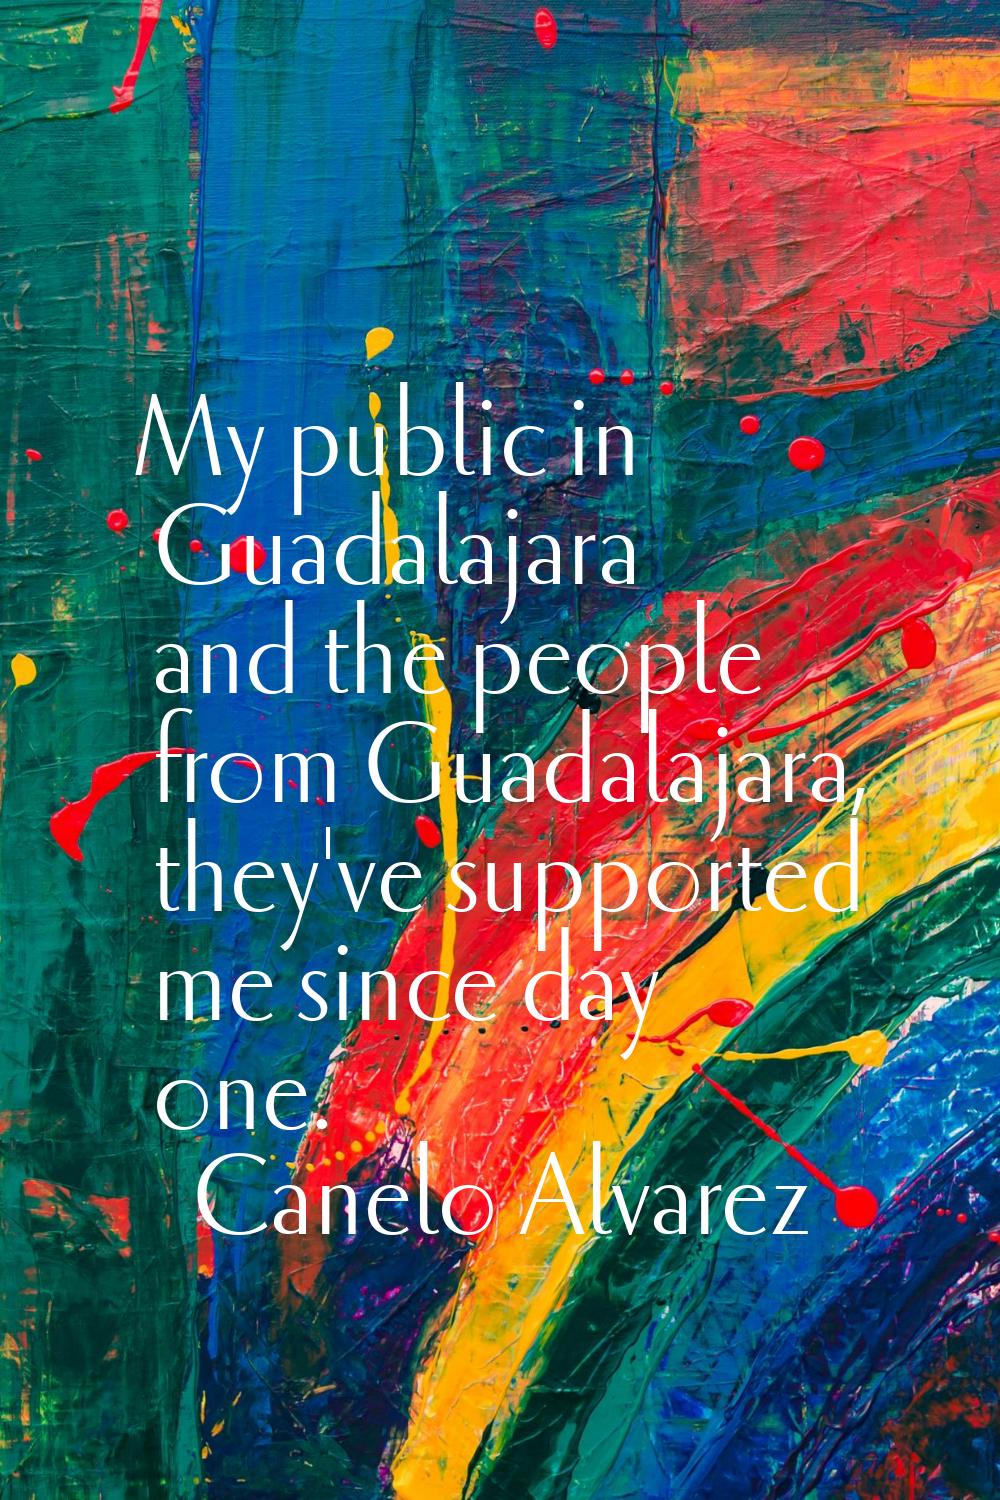 My public in Guadalajara and the people from Guadalajara, they've supported me since day one.